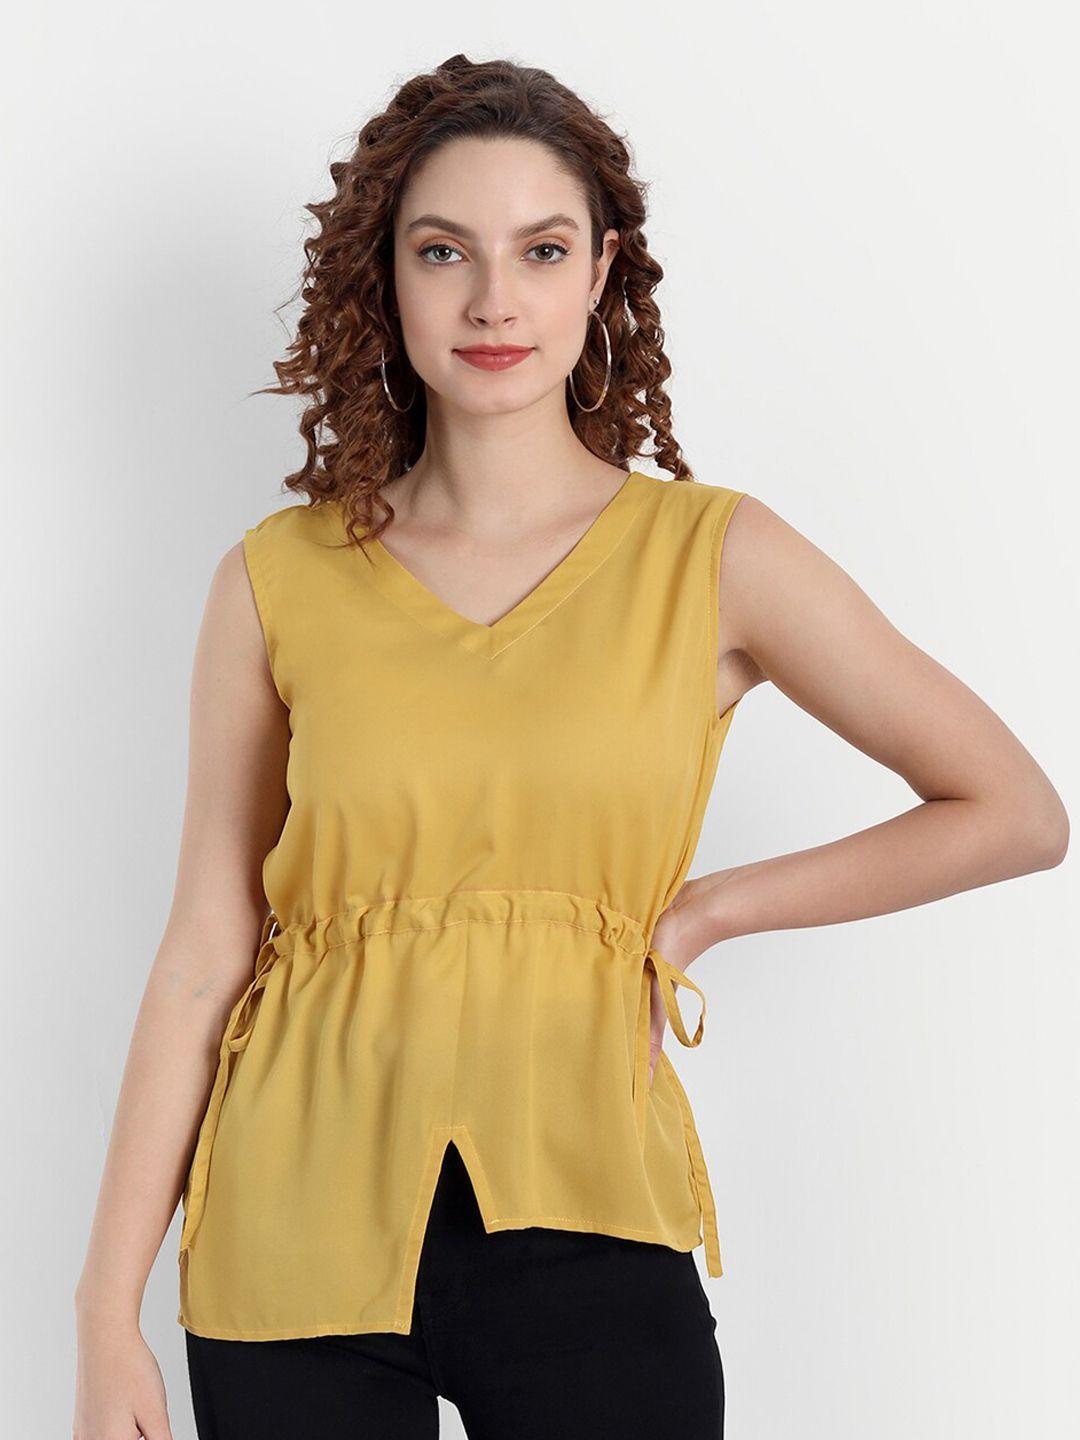 parassio clothings women yellow georgette top